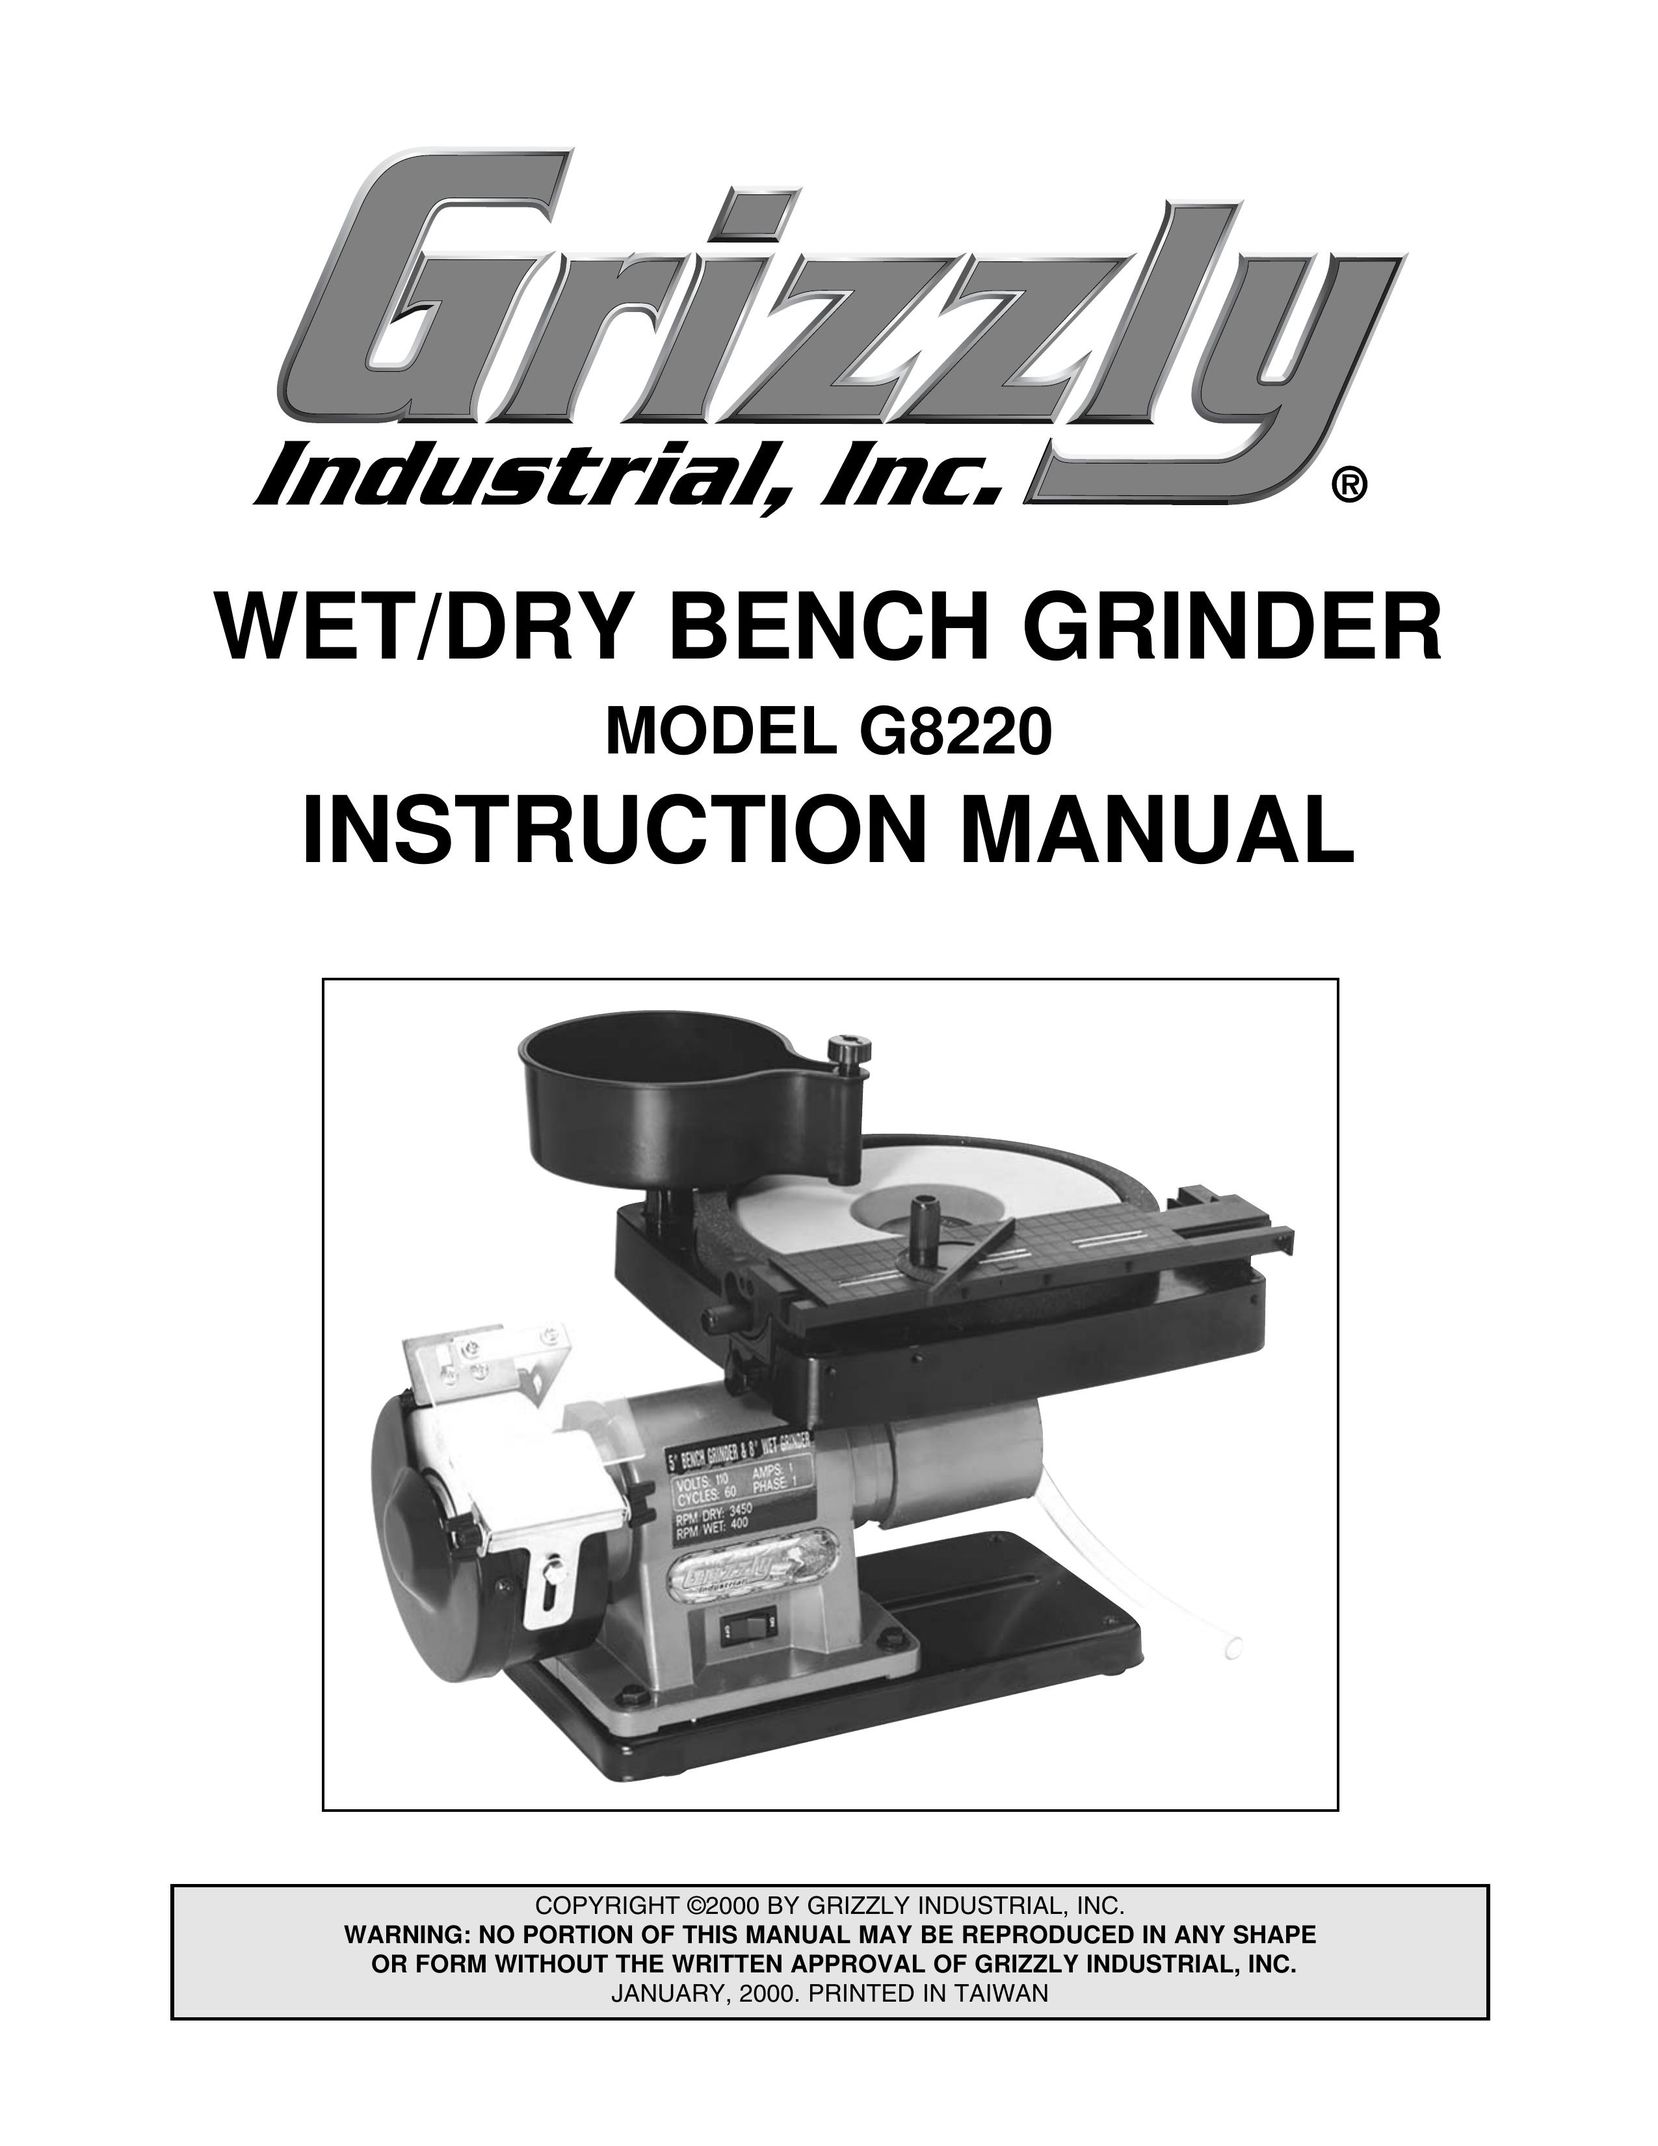 Grizzly G8220 Grinder User Manual